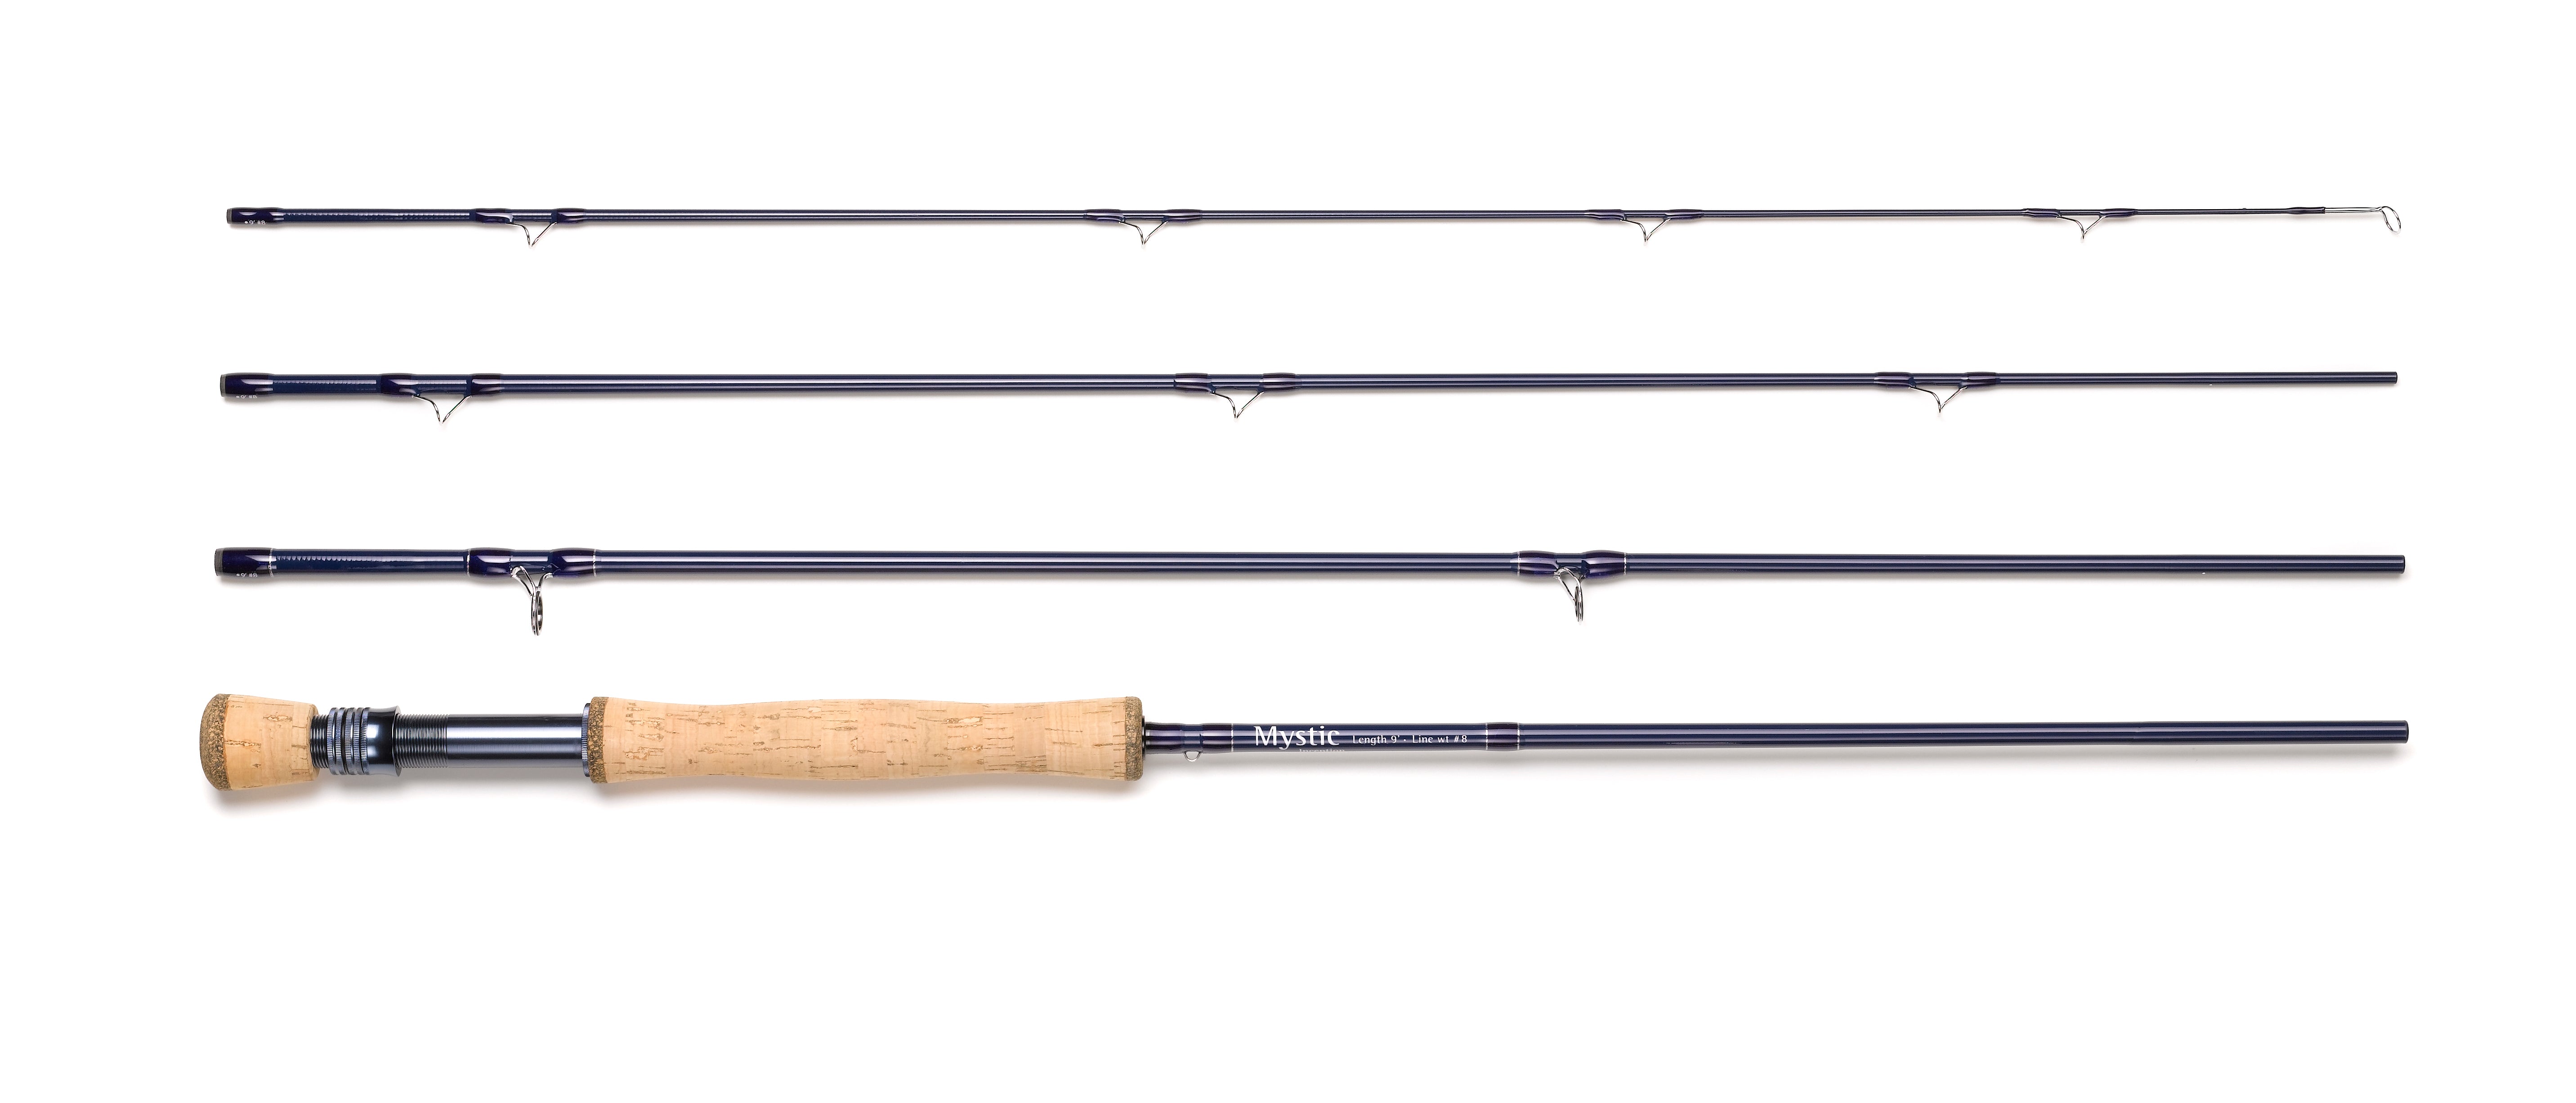 Inception Beginner Fly Rod  Fly Fishing Rod for Sale – Mystic Outdoors